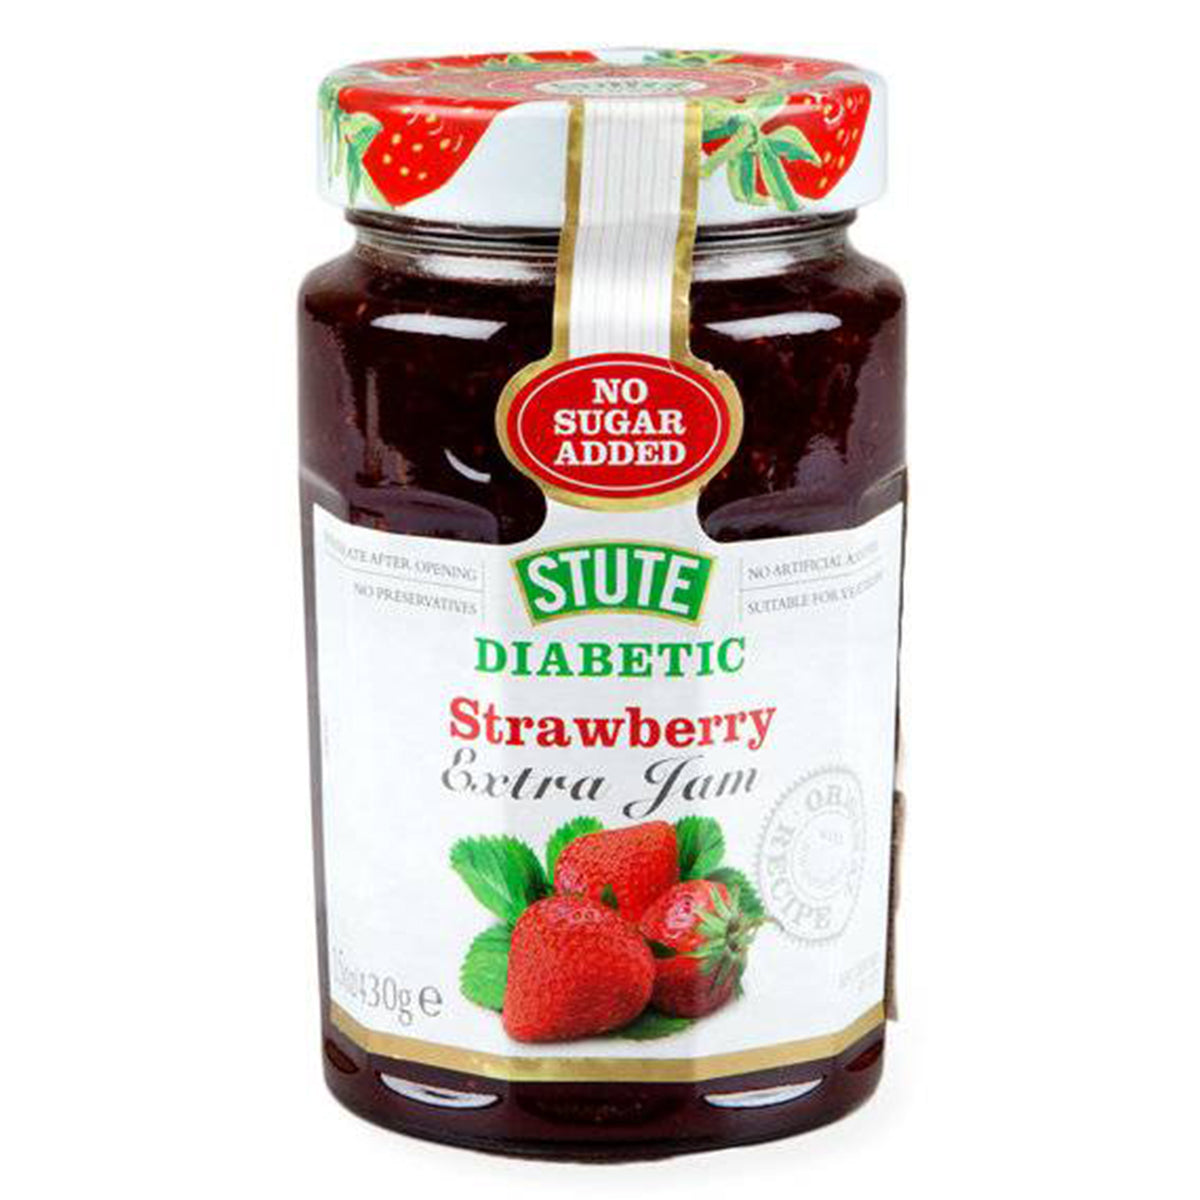 A jar of Stute - No Sugar Added Strawberry Extra Jam - 430g on a white background.